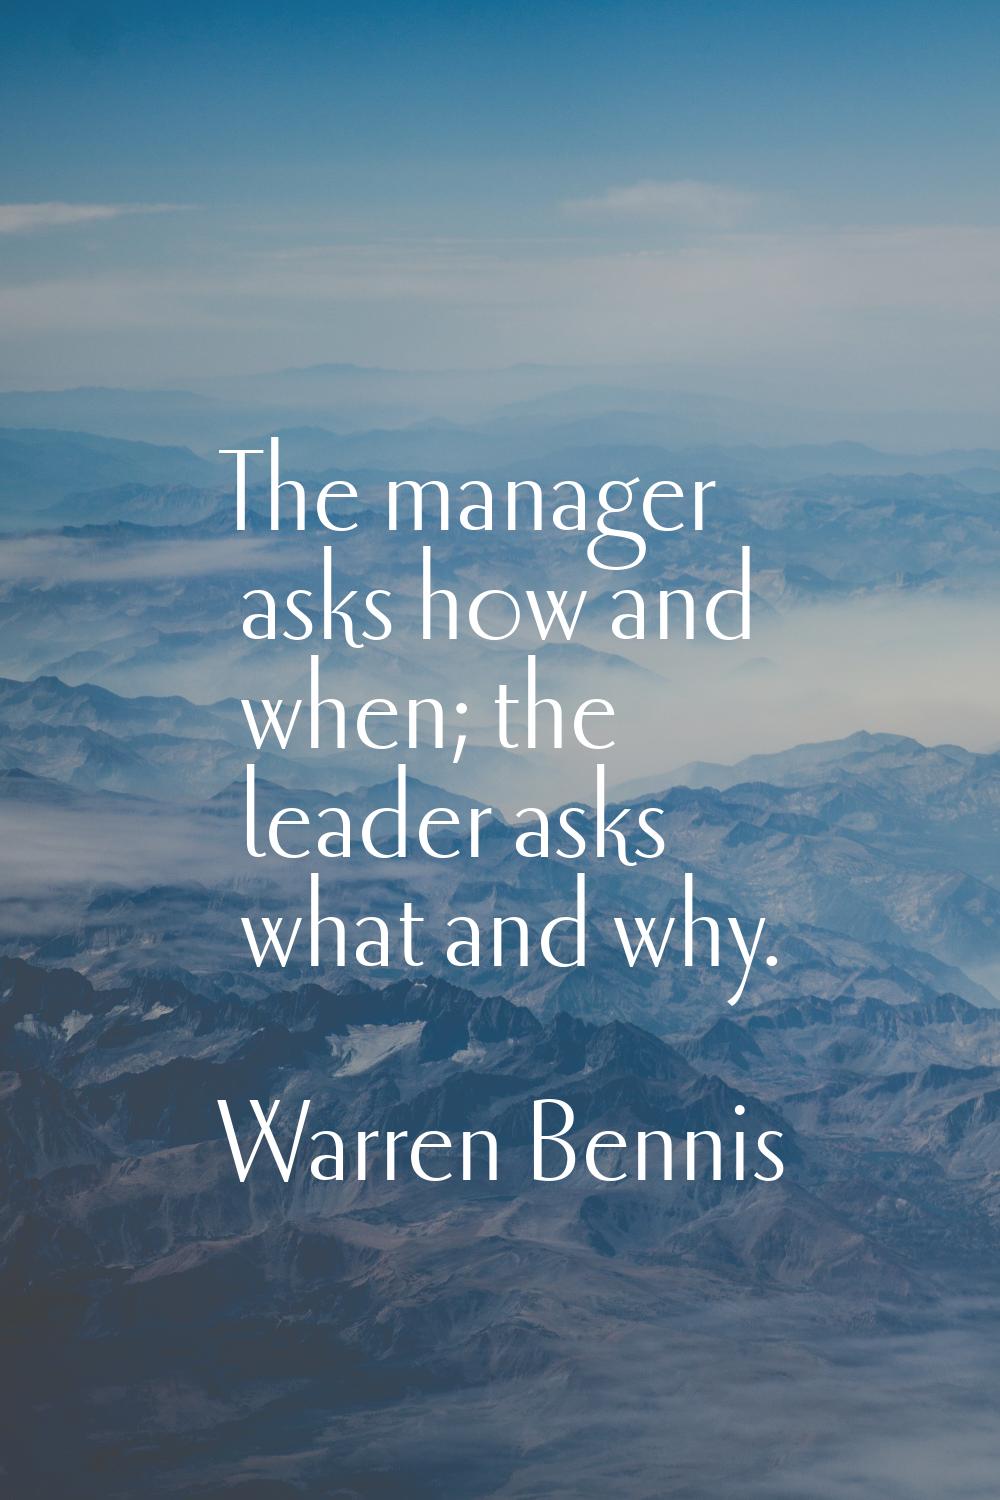 The manager asks how and when; the leader asks what and why.